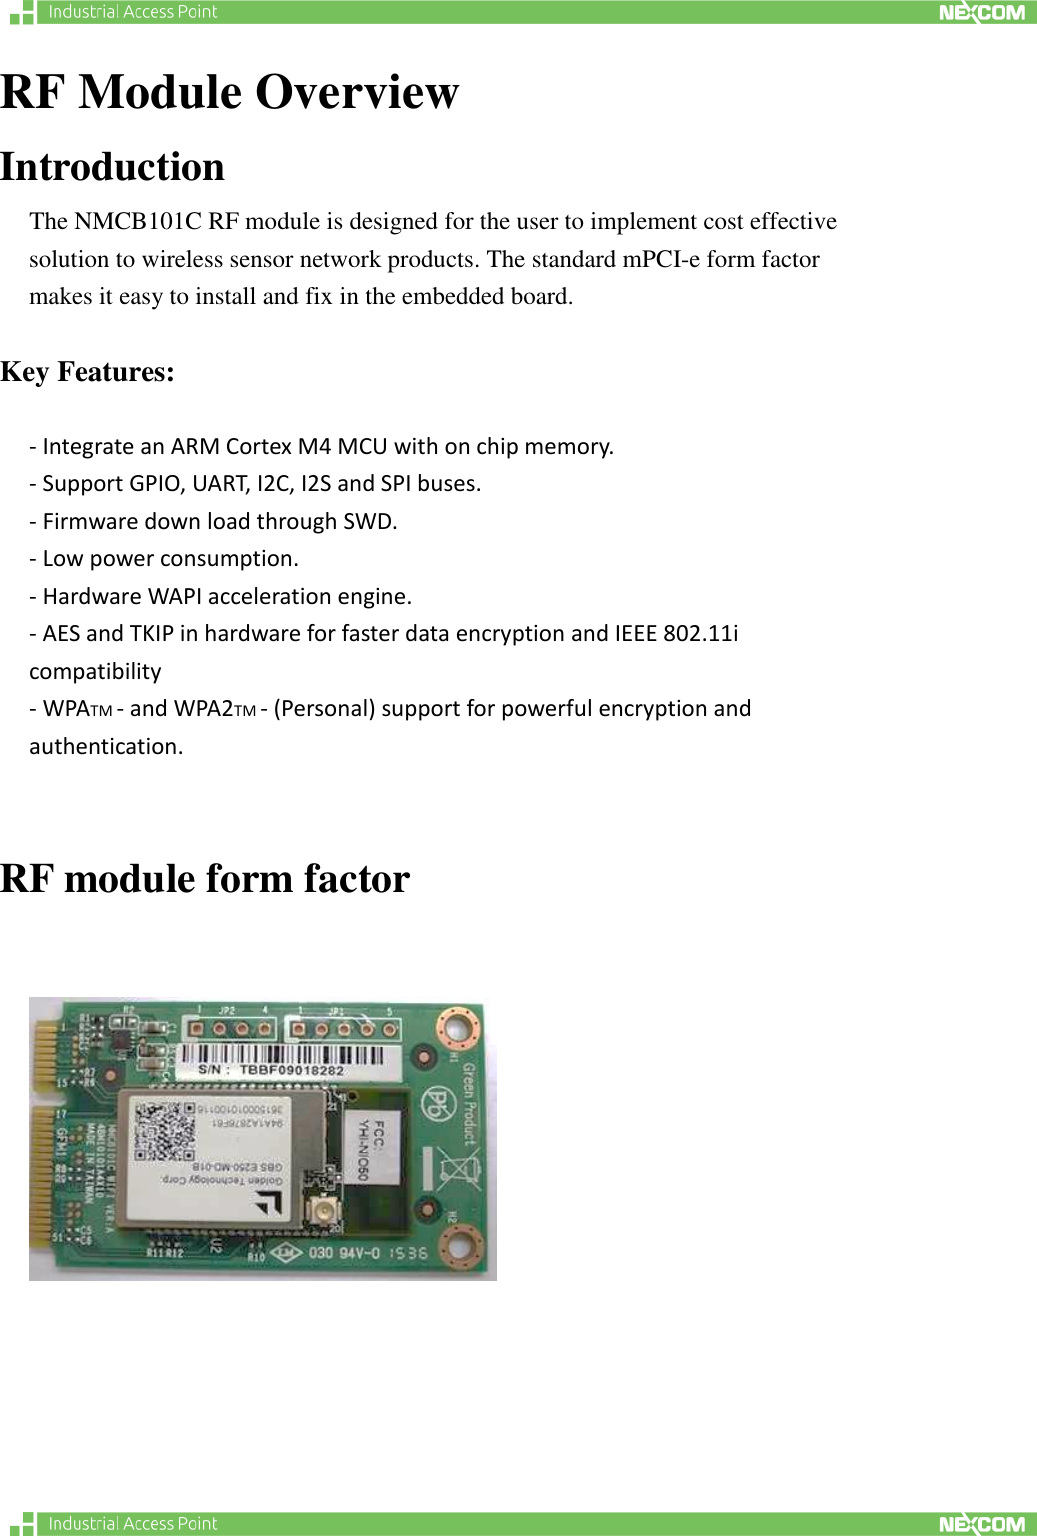   RF Module Overview Introduction The NMCB101C RF module is designed for the user to implement cost effective solution to wireless sensor network products. The standard mPCI-e form factor makes it easy to install and fix in the embedded board.      Key Features:  - Integrate an ARM Cortex M4 MCU with on chip memory.   - Support GPIO, UART, I2C, I2S and SPI buses.   - Firmware down load through SWD.   - Low power consumption.   - Hardware WAPI acceleration engine.   - AES and TKIP in hardware for faster data encryption and IEEE 802.11i compatibility   - WPATM - and WPA2TM - (Personal) support for powerful encryption and authentication.    RF module form factor        